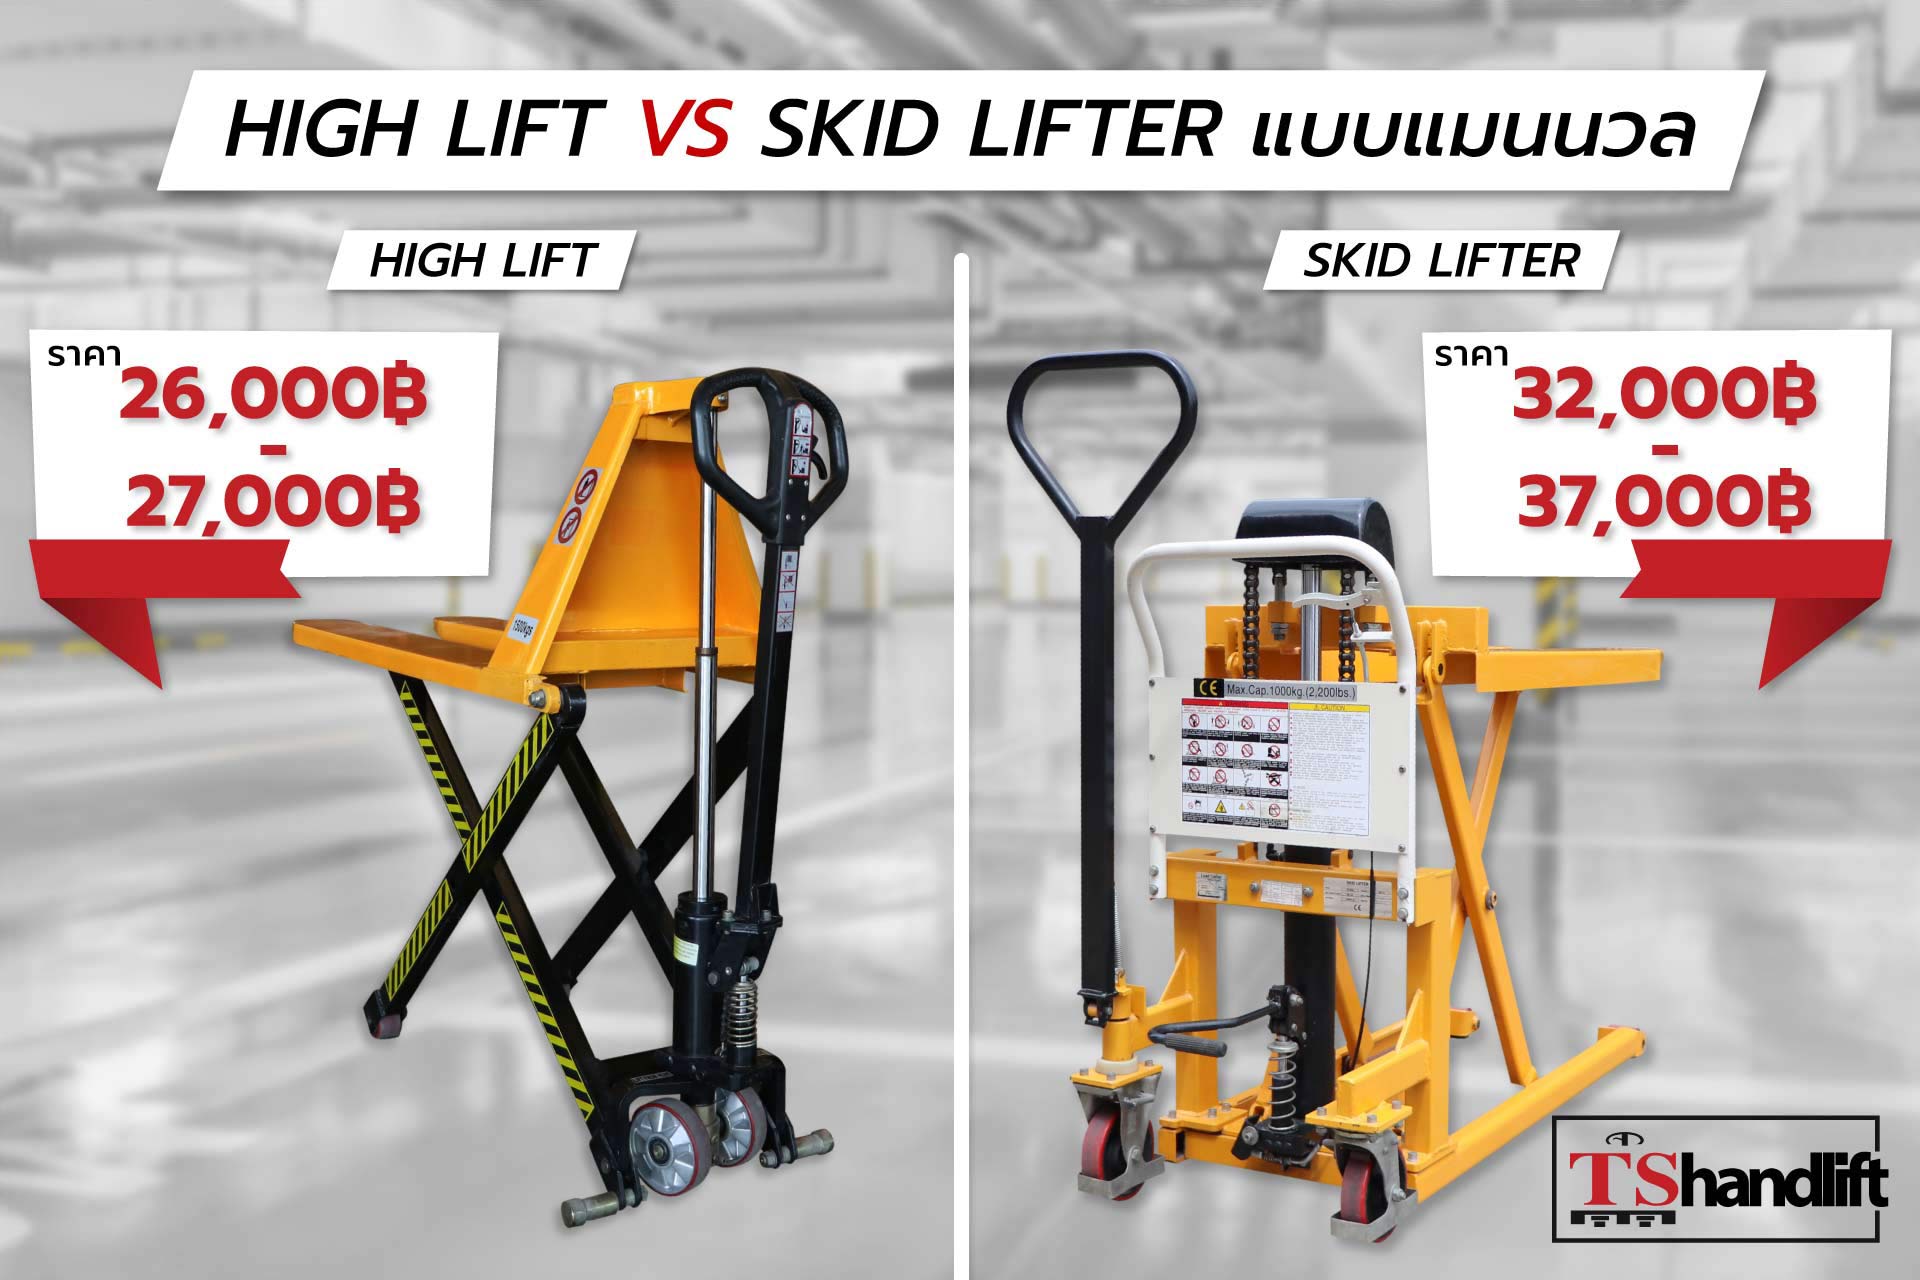 Section 03 3. 5 high lift pallet truck vs skid lifter electric product price comparison update